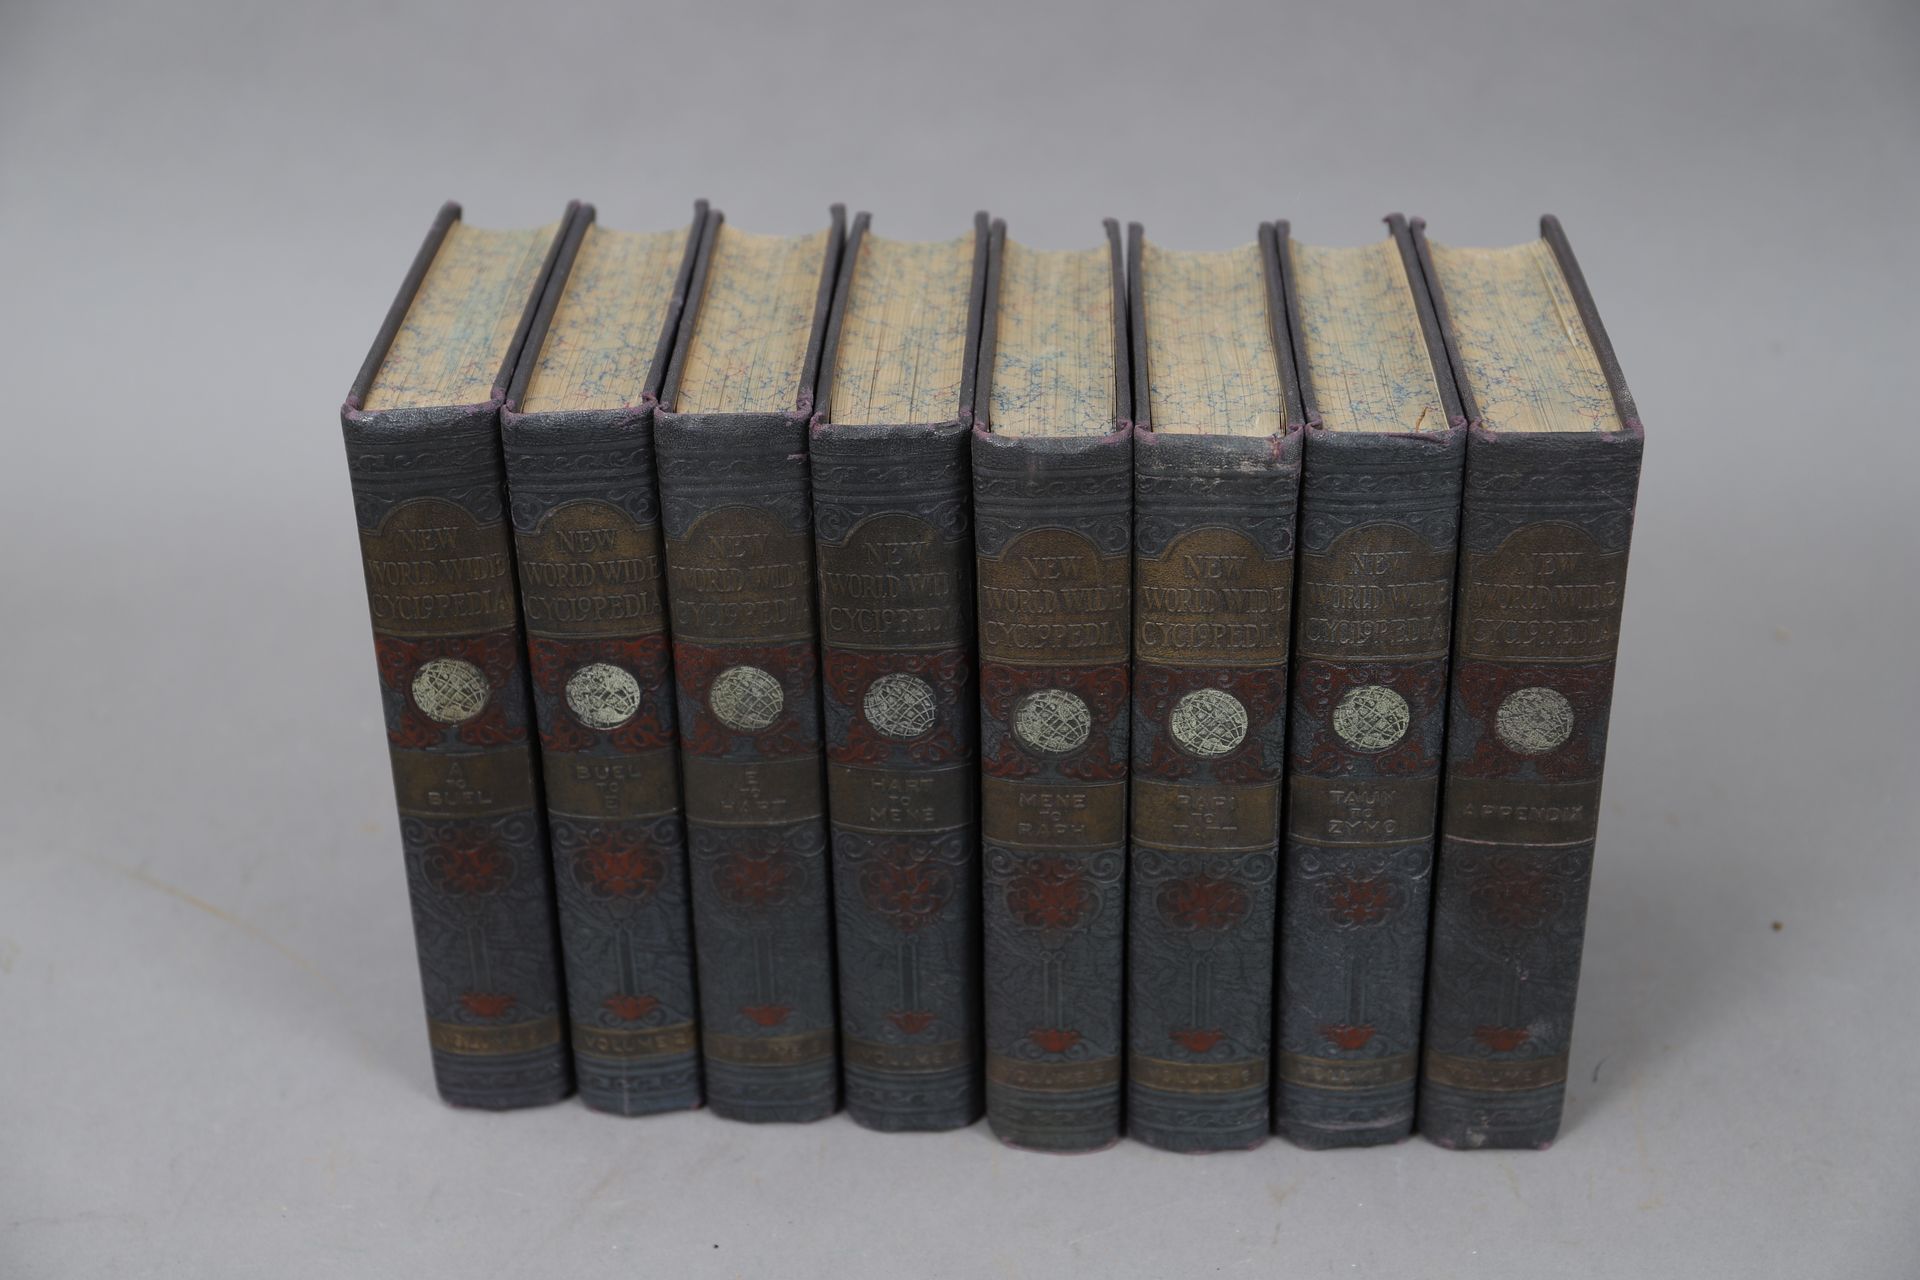 Null THE NEW WORLD-WIDE CYCLOPEDIA.

CHICAGO 1928, 

8 bound volumes.